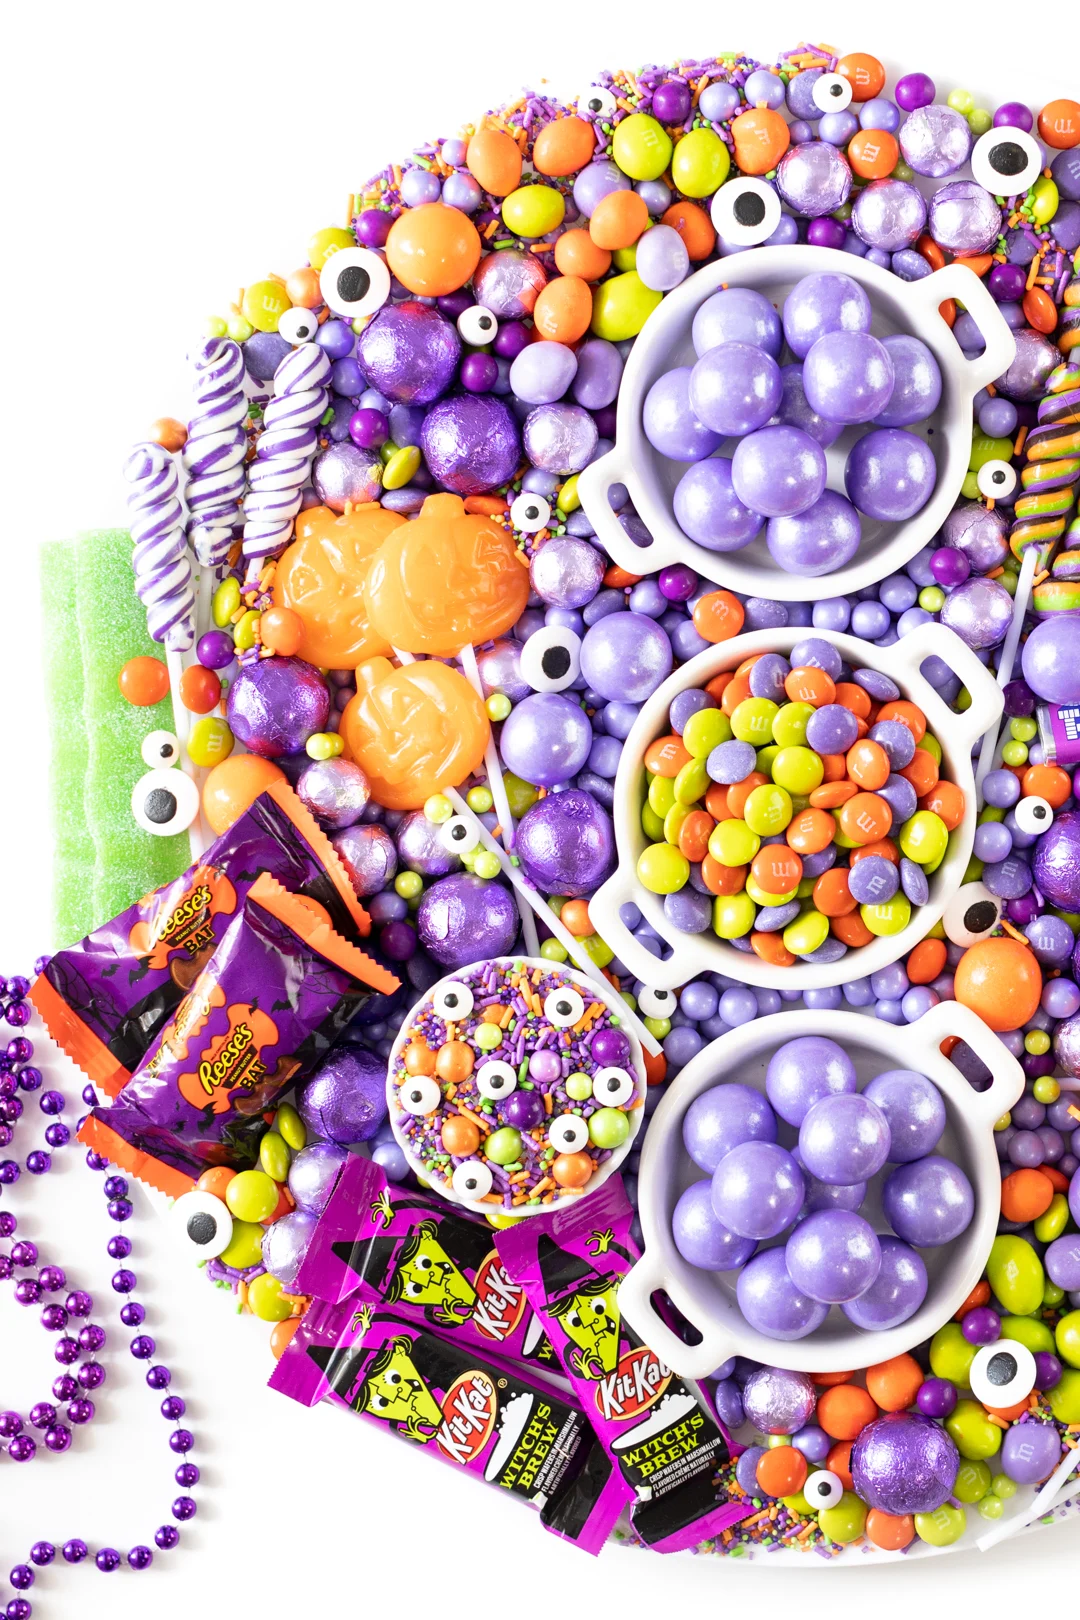 halloween candy selection. green, purple and orange. Halloween M&Ms, Gumballs, Jack o lantern Lollipops, witch chocolates